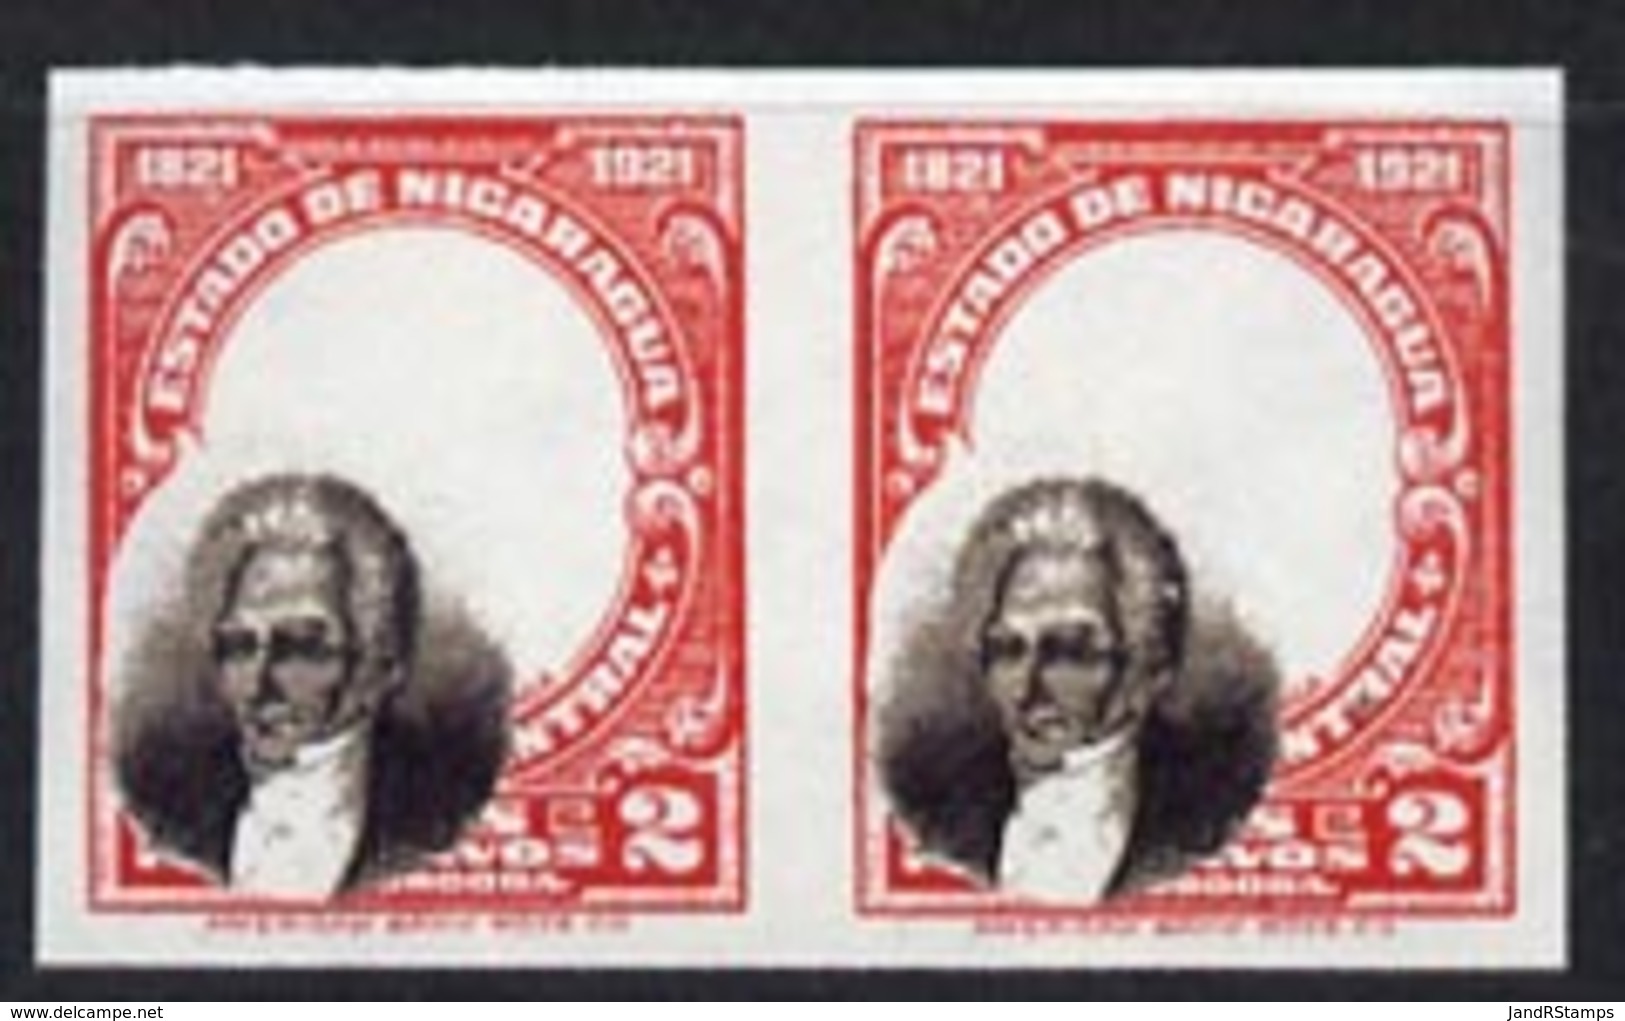 Nicaragua 1921 Centenary 2c With Superb Misplaced Portrait, Imperf Pair Being A 'Hialeah' Forgery On Gummed Paper (as SG - Nicaragua